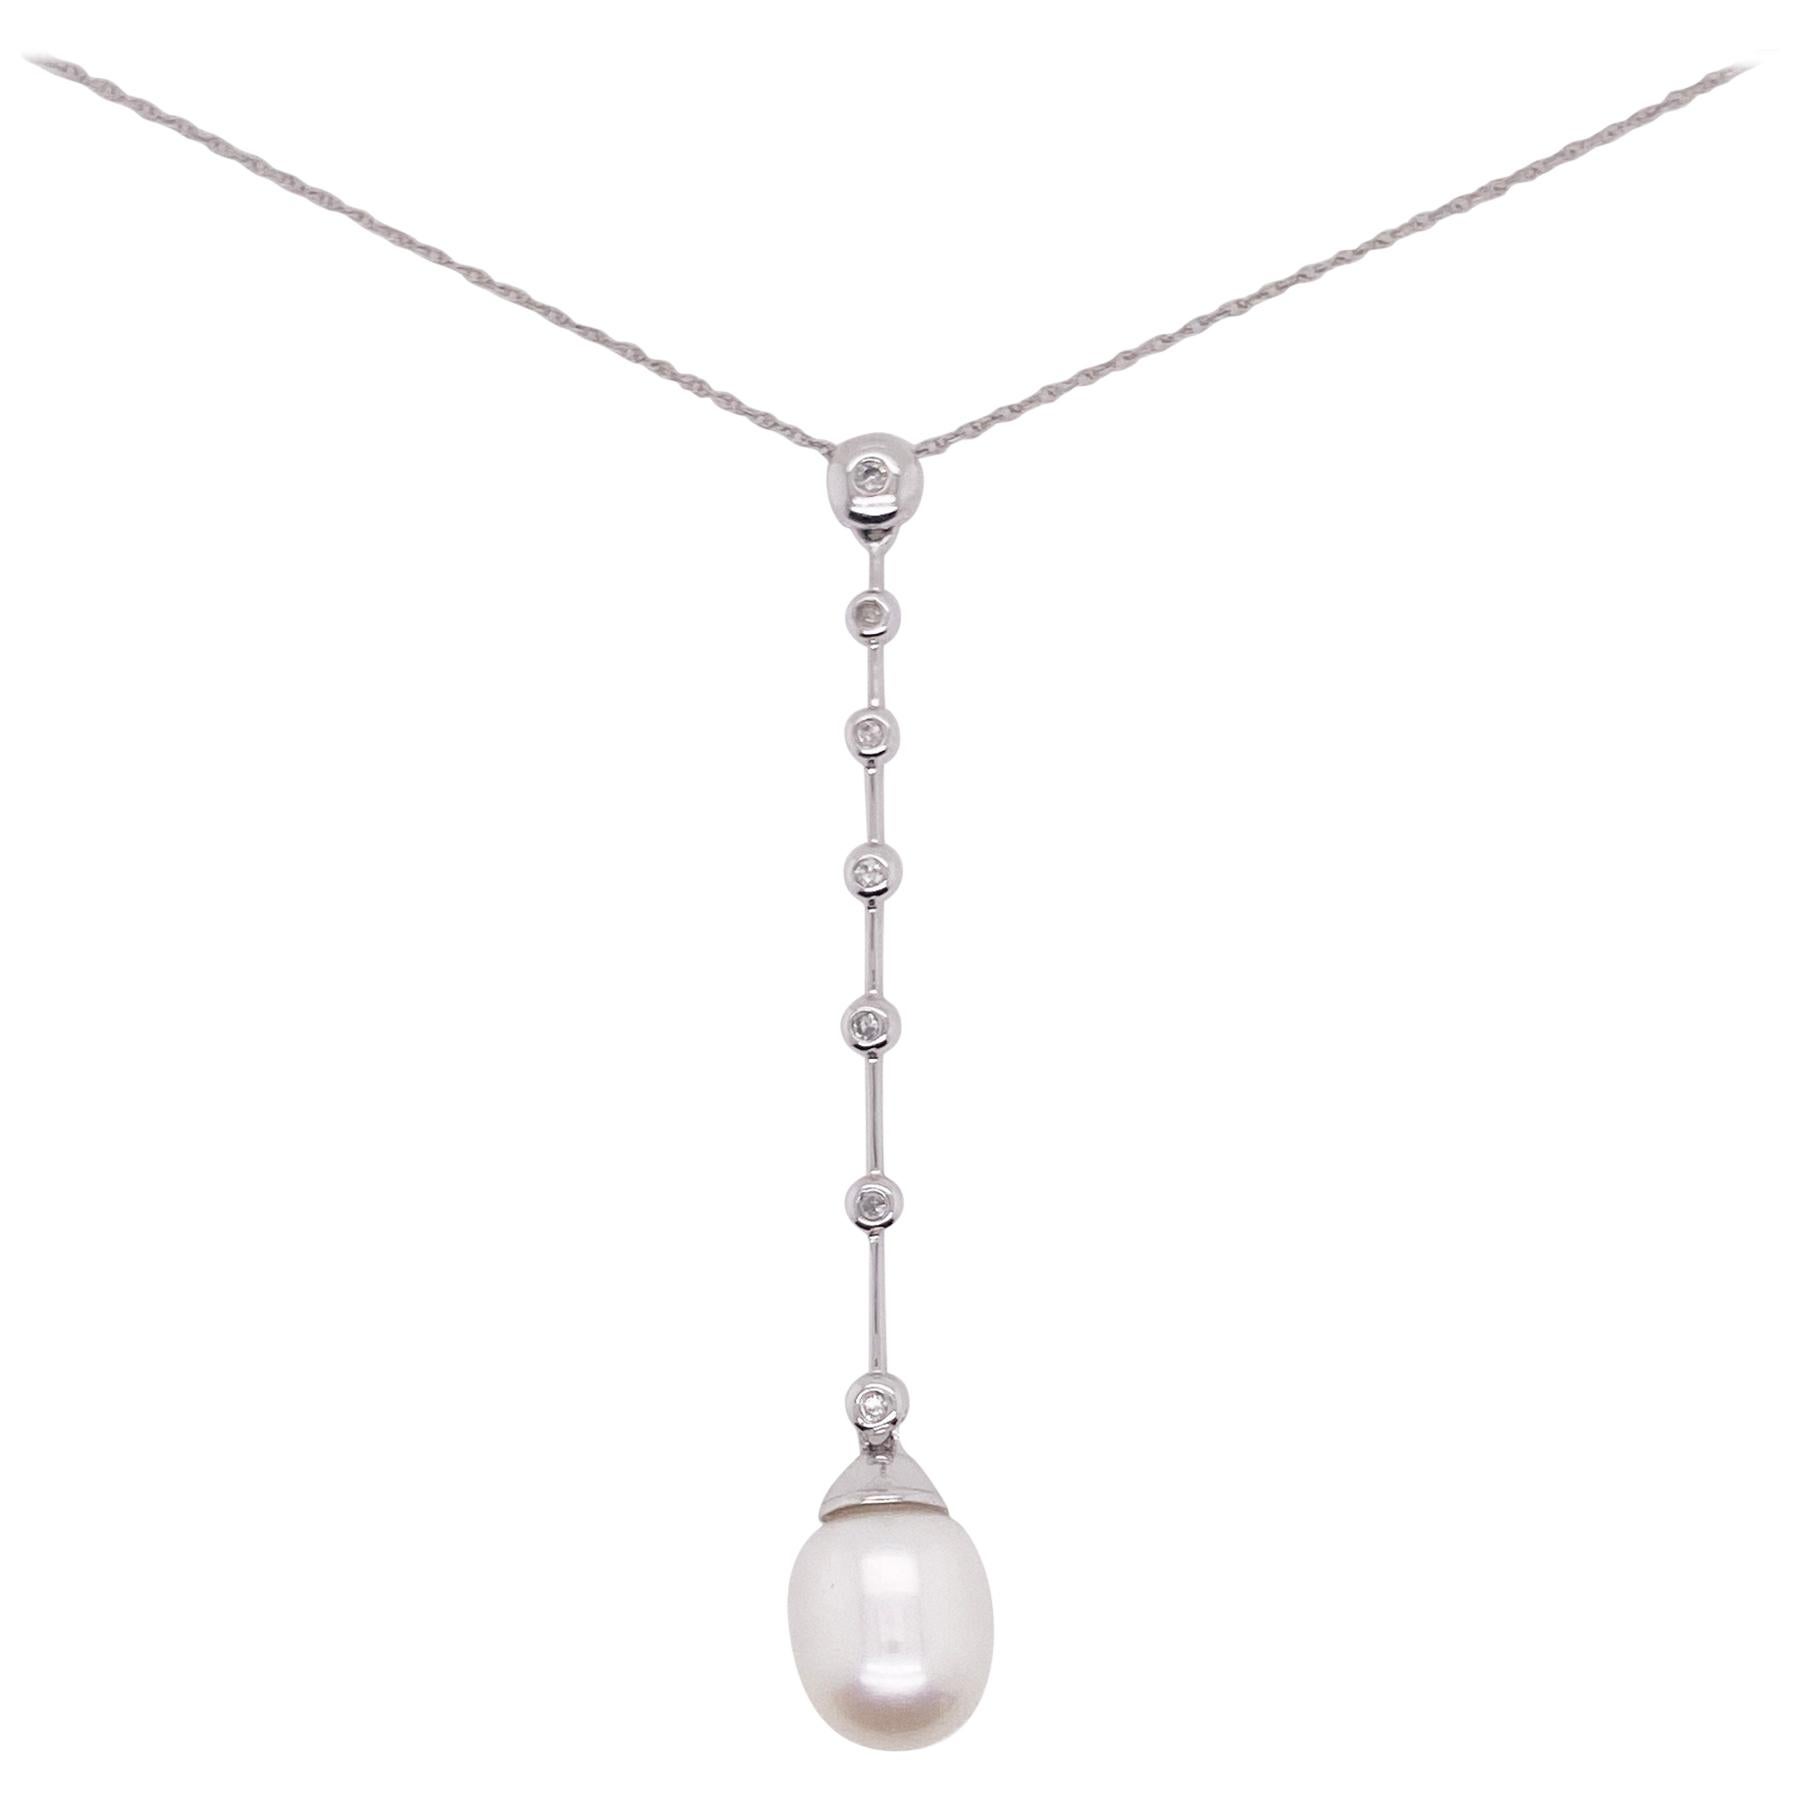 Pearl Diamond Necklace, Vintage Original in 14k White Gold, Pearl Bridal Jewelry